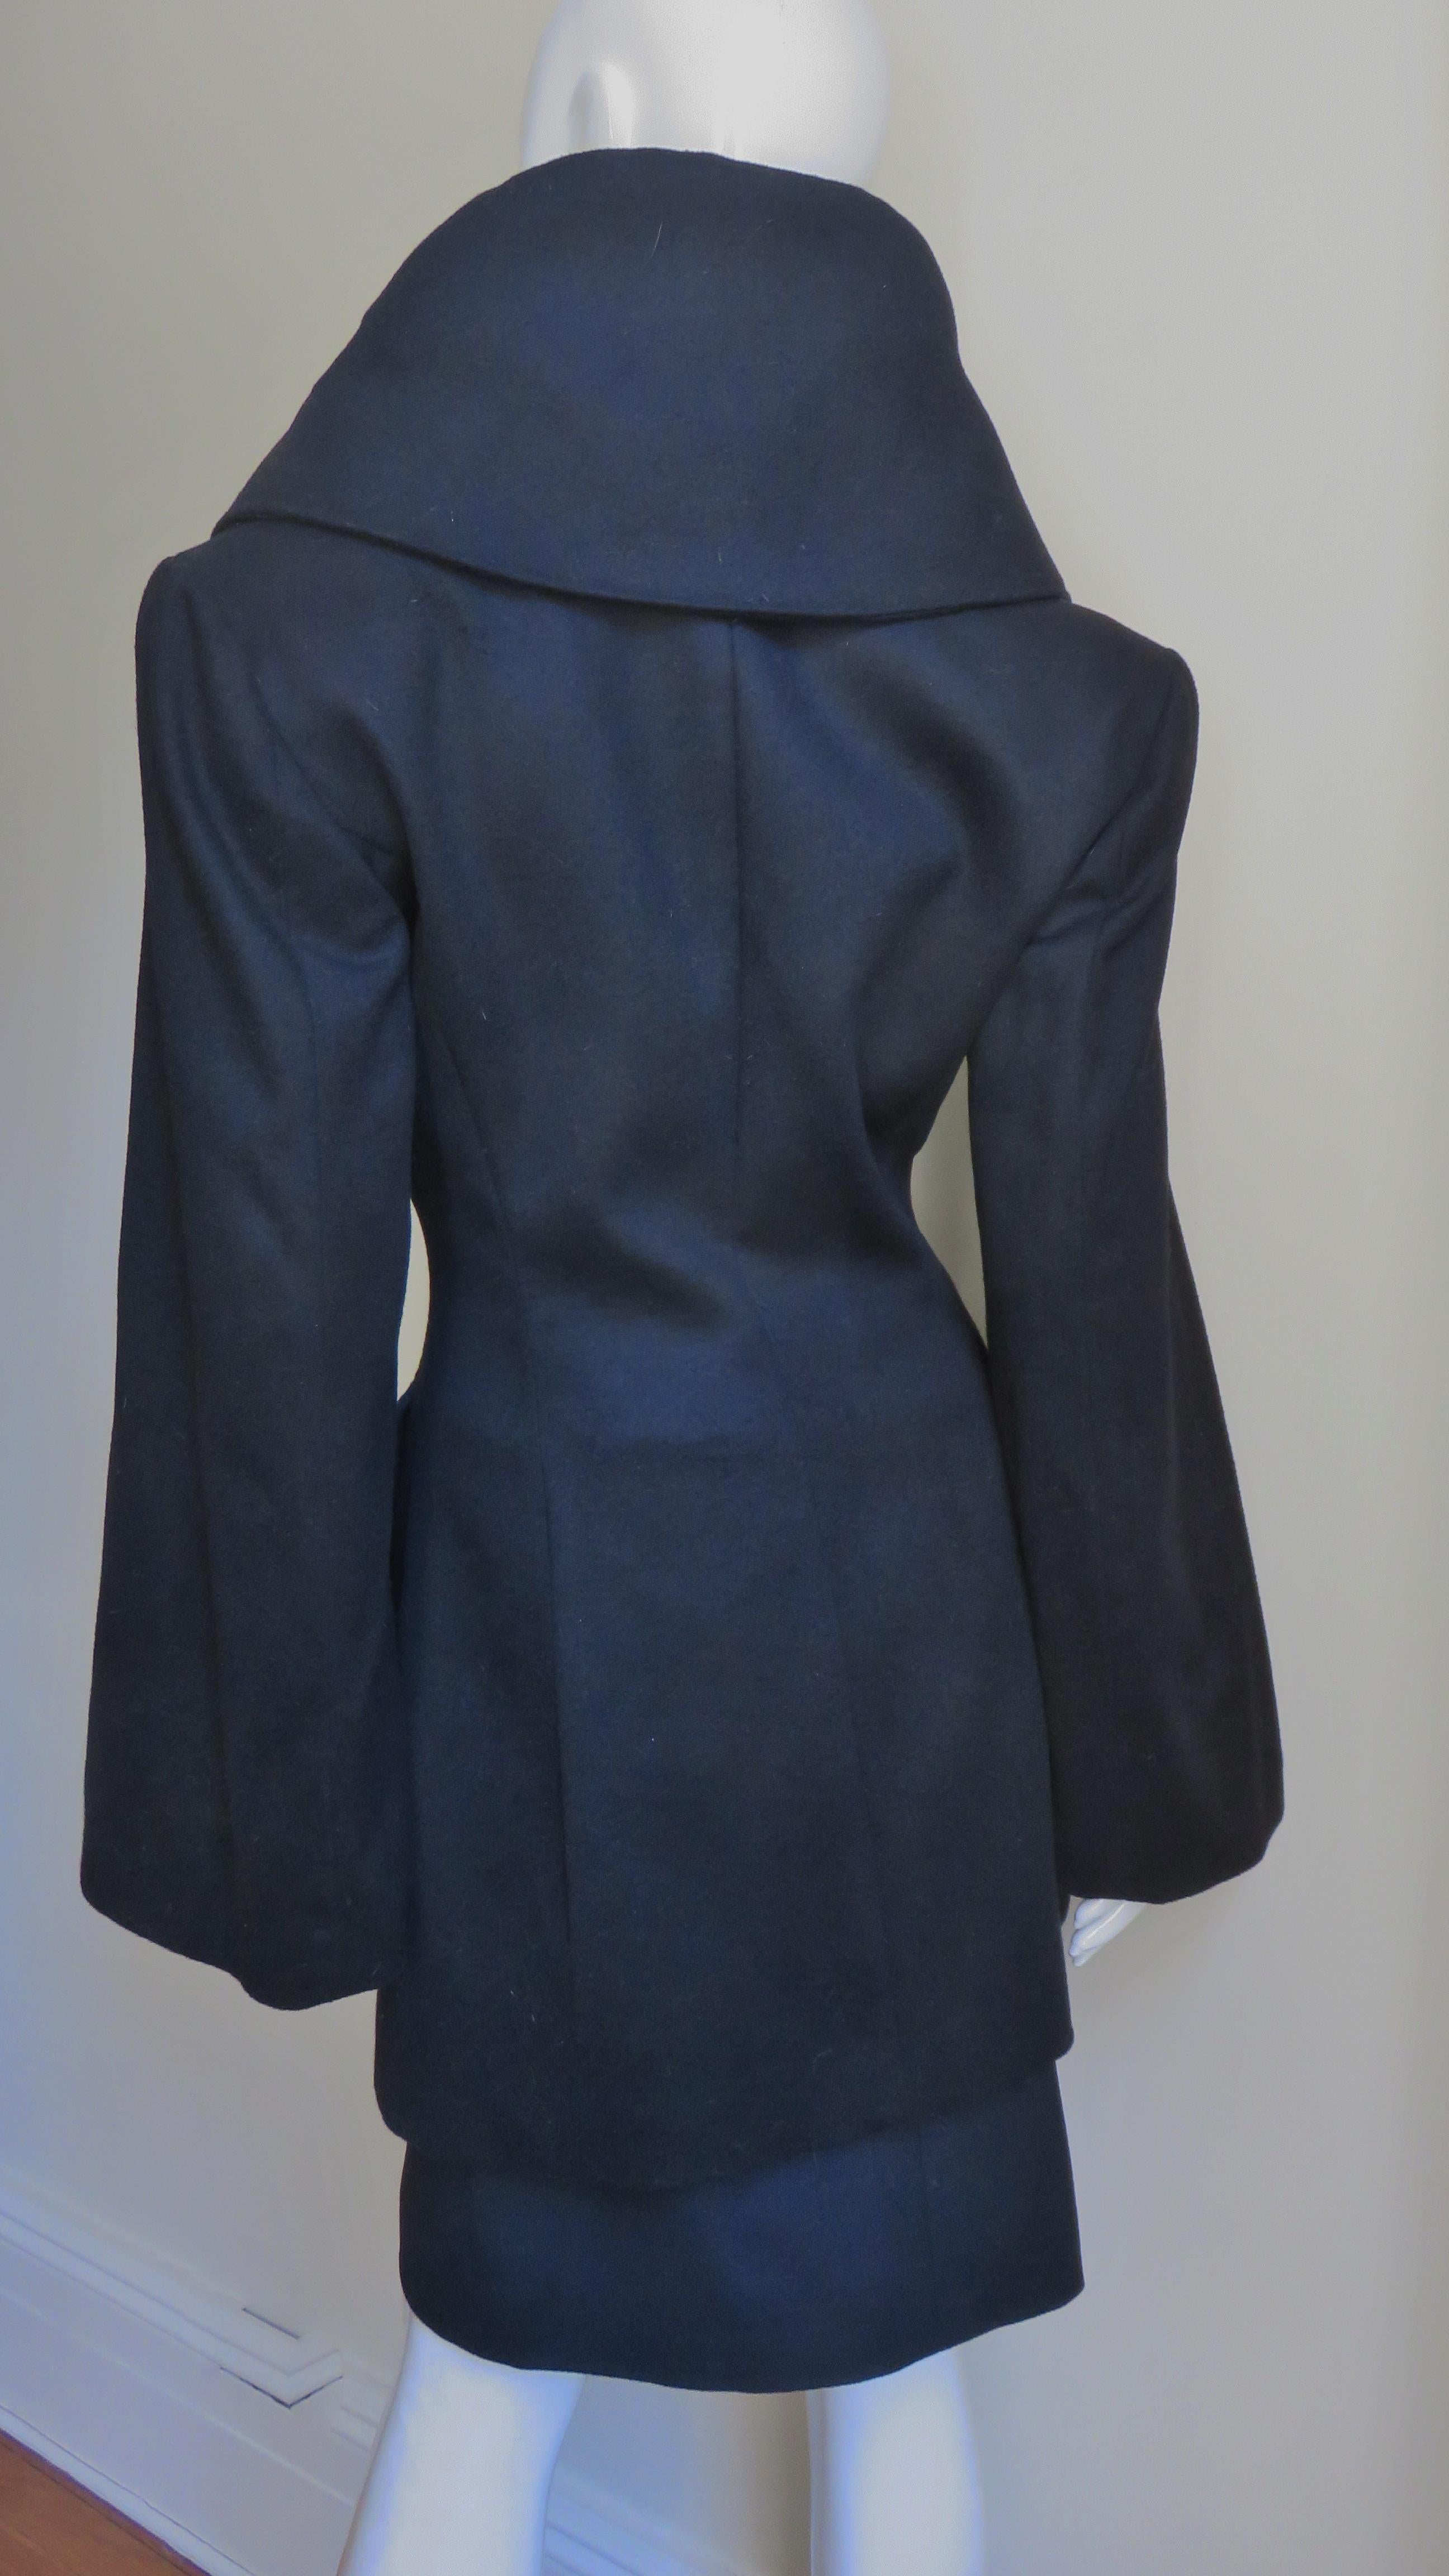 Women's Alexander McQueen New Cashmere Popped Lapel Collar Jacket and Skirt A/W 1999 For Sale